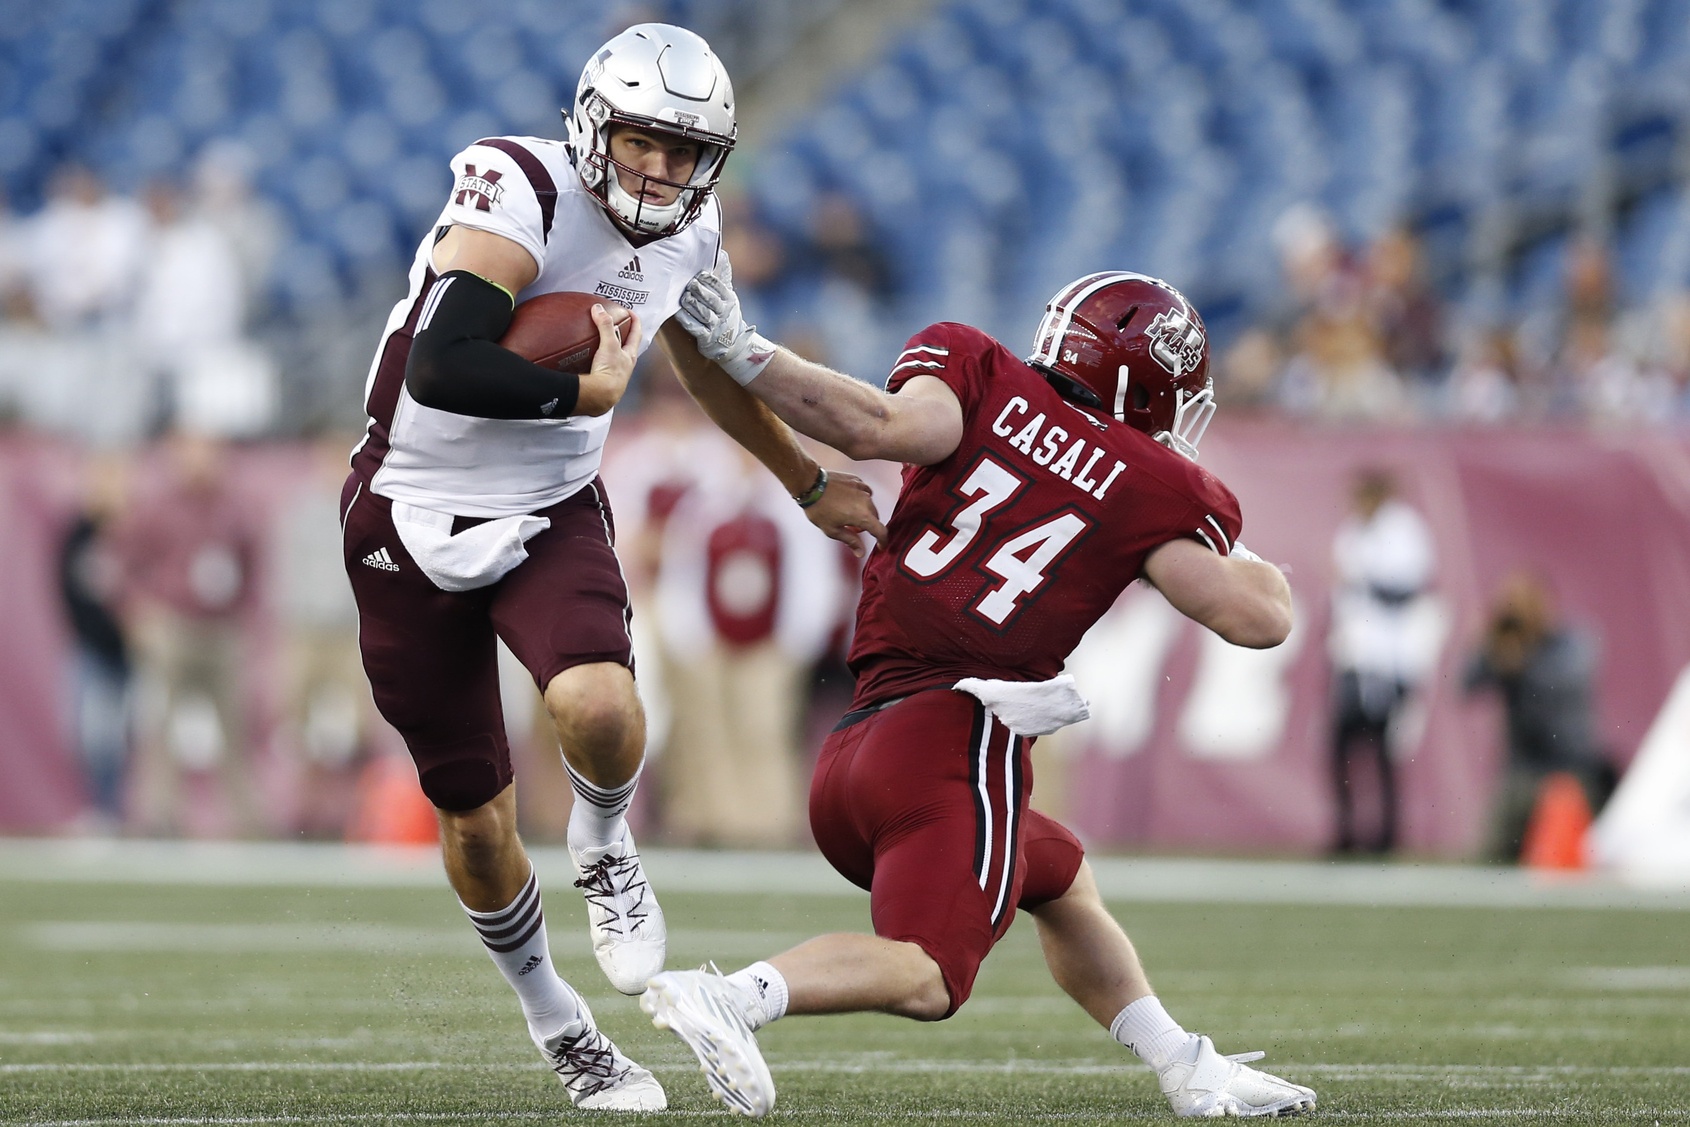 Sep 24, 2016; Foxborough, MA, USA; Mississippi State Bulldogs quarterback Nick Fitzgerald (7) evades a tackle by Massachusetts Minutemen line backer Steve Casali (34) during the third quarter at Gillette Stadium. Mississippi State won 47-35. Credit: Greg M. Cooper-USA TODAY Sports